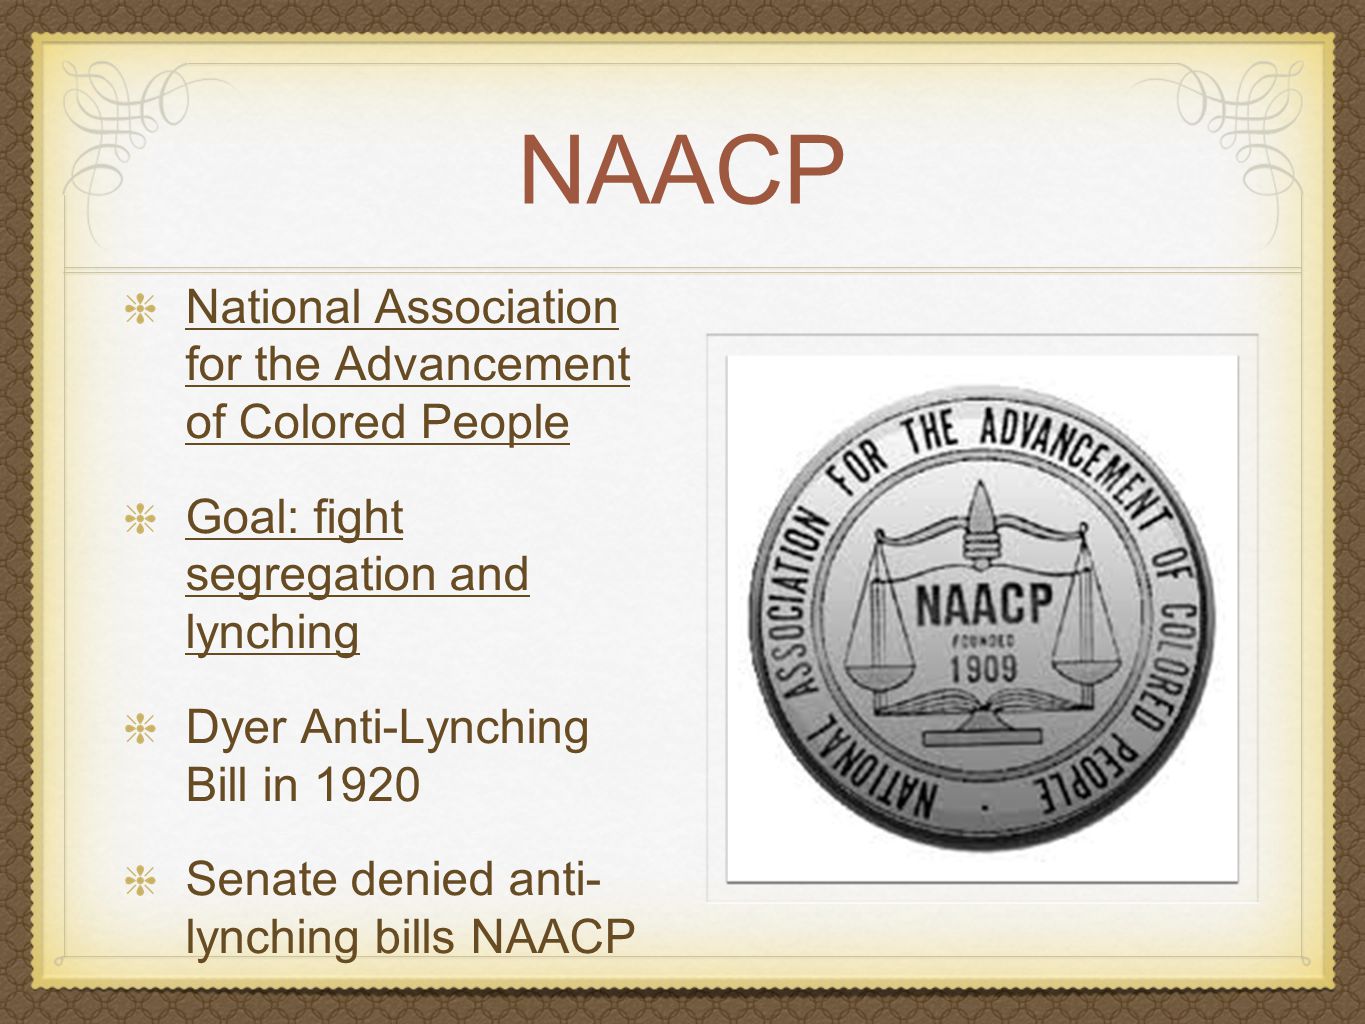 NAACP National Association for the Advancement of Colored People